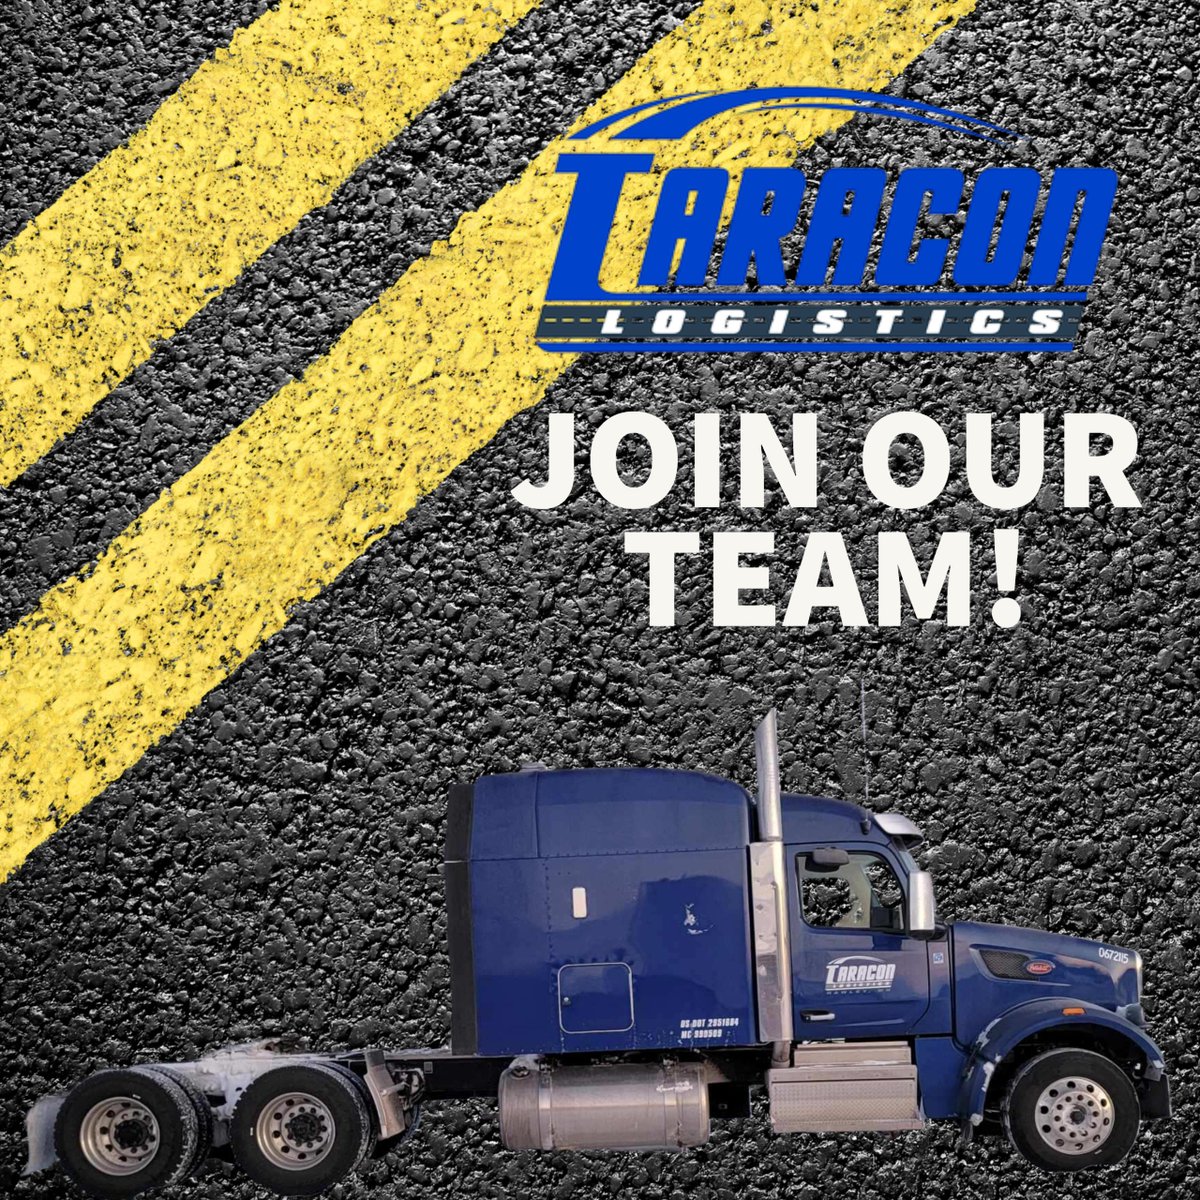 🚚 Ready to hit the road? Taracon Logistics is on the hunt for CDL truck drivers in Fargo and Minneapolis!  Join our team and drive your career forward. 🛣️ Apply now at taraconlogistics.com and let's roll!  #CDLJobs #TruckDriversWanted #TaraconLogisticsHiring 🚛